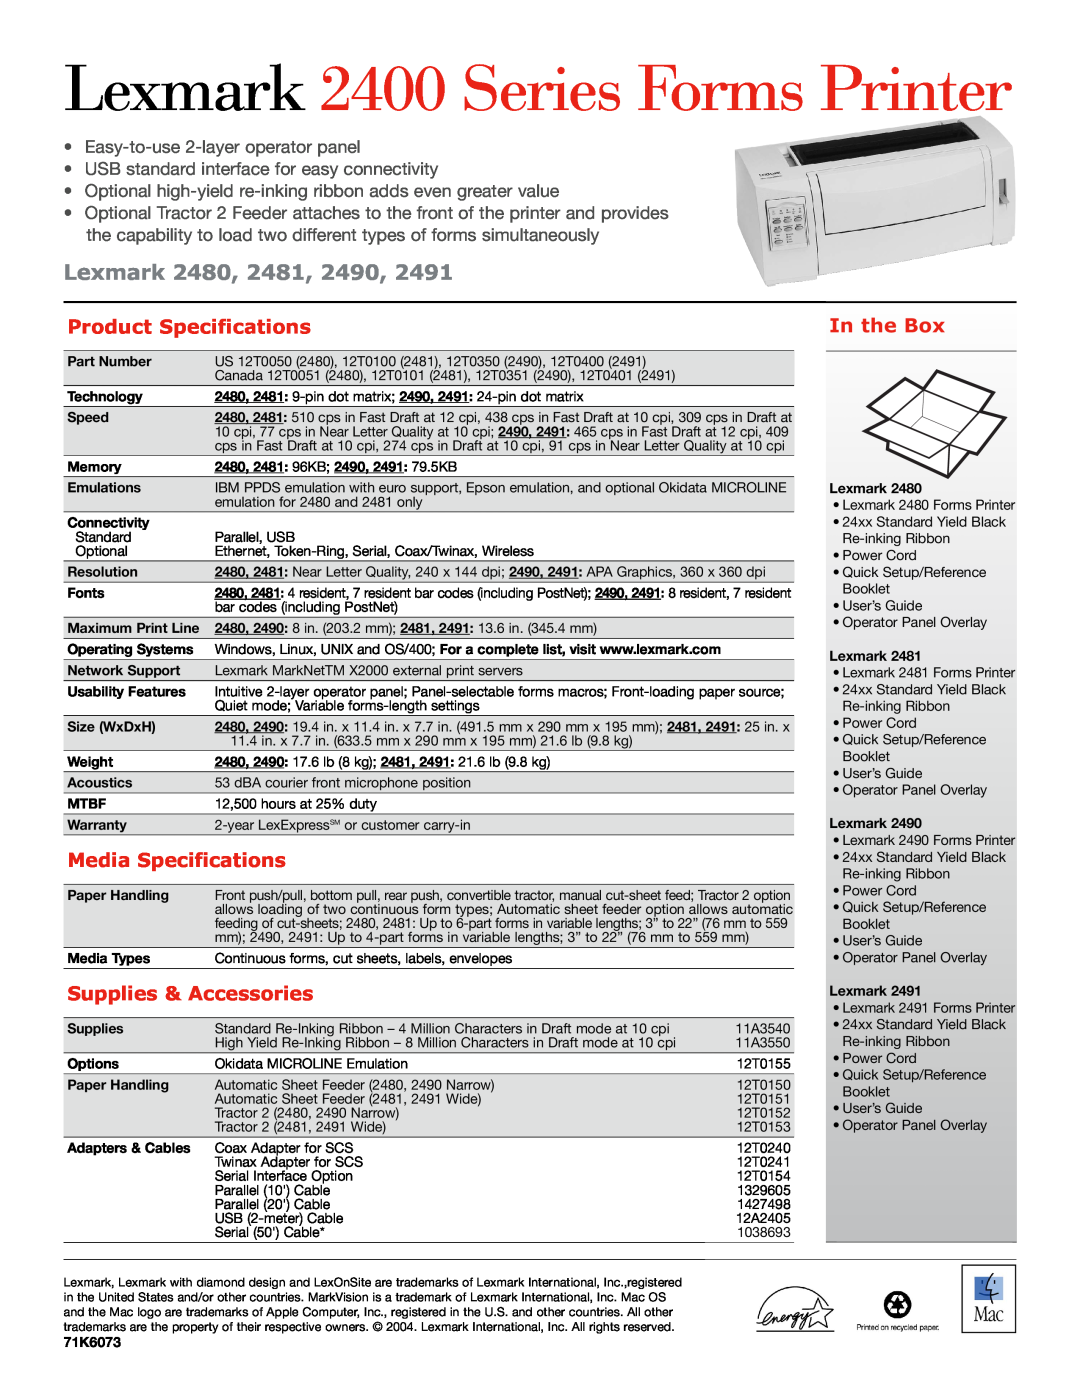 Lexmark Lexmark 2400 Series Forms Printer, Lexmark 2480, 2481, Product Specifications, Media Specifications, In the Box 